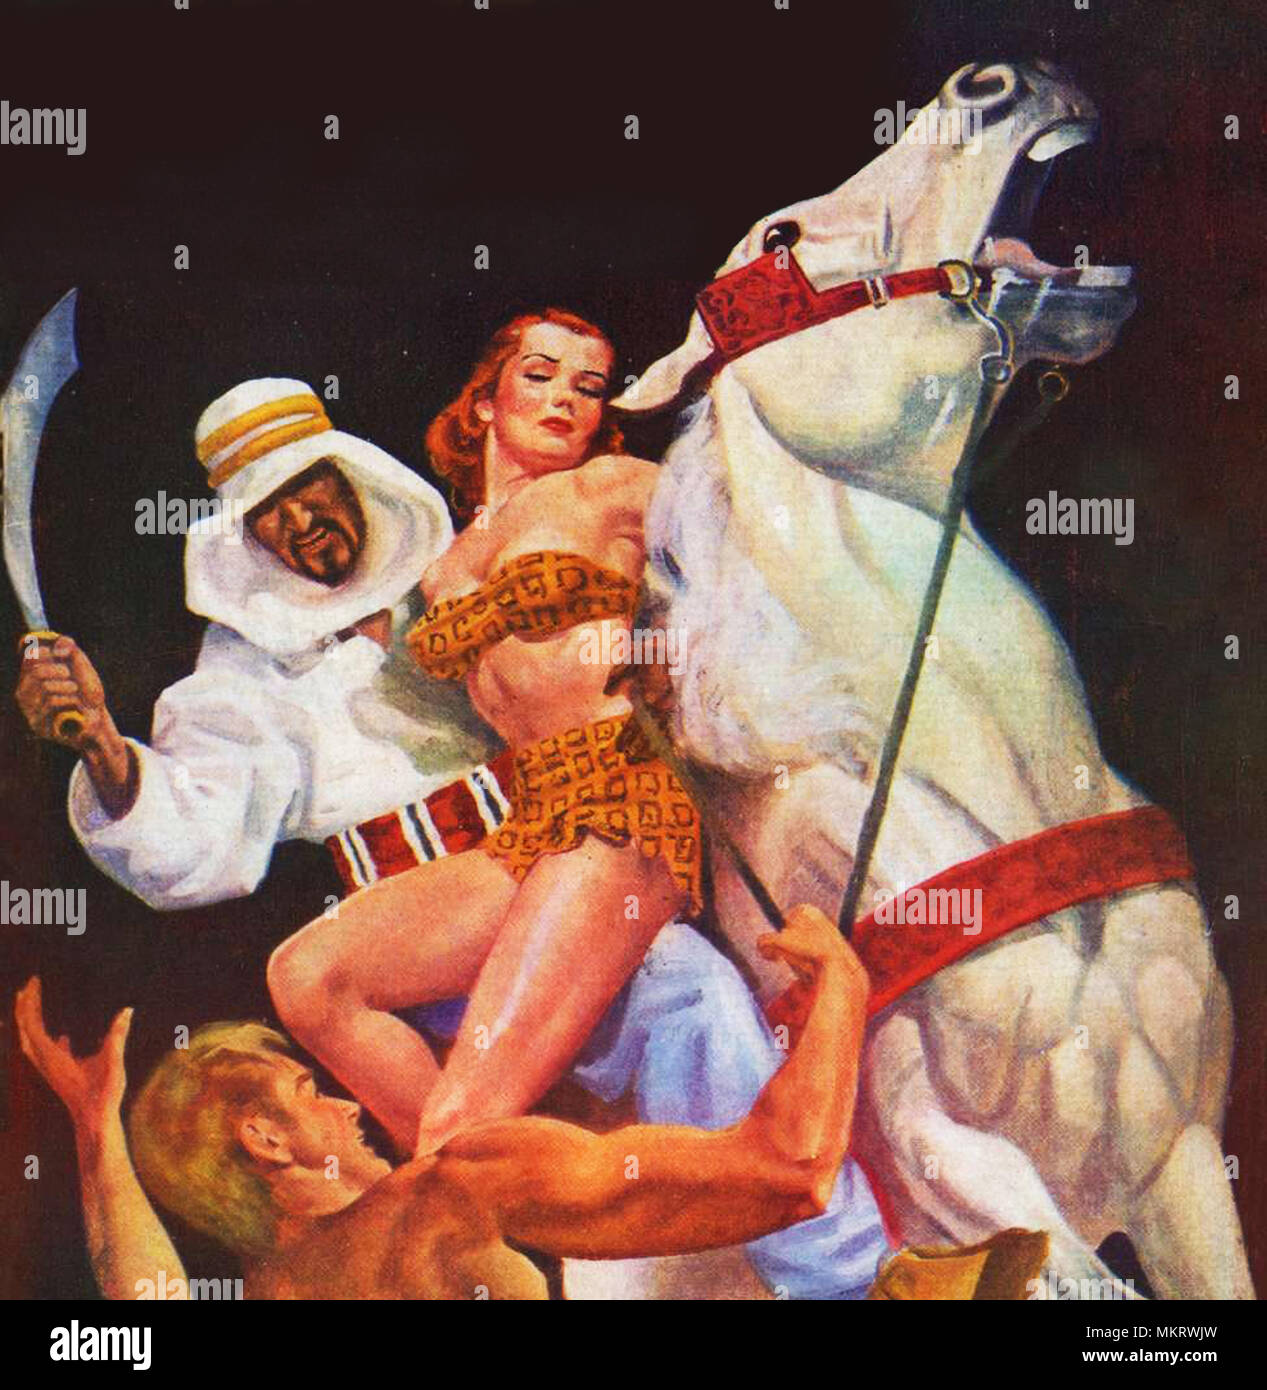 classic pulp fiction art featuring barbarians, animals, heroes and villains. From classic stories featuring Sheena, Gor and other characters. Great for use as fantasy novel or kindle book covers etc Stock Photo